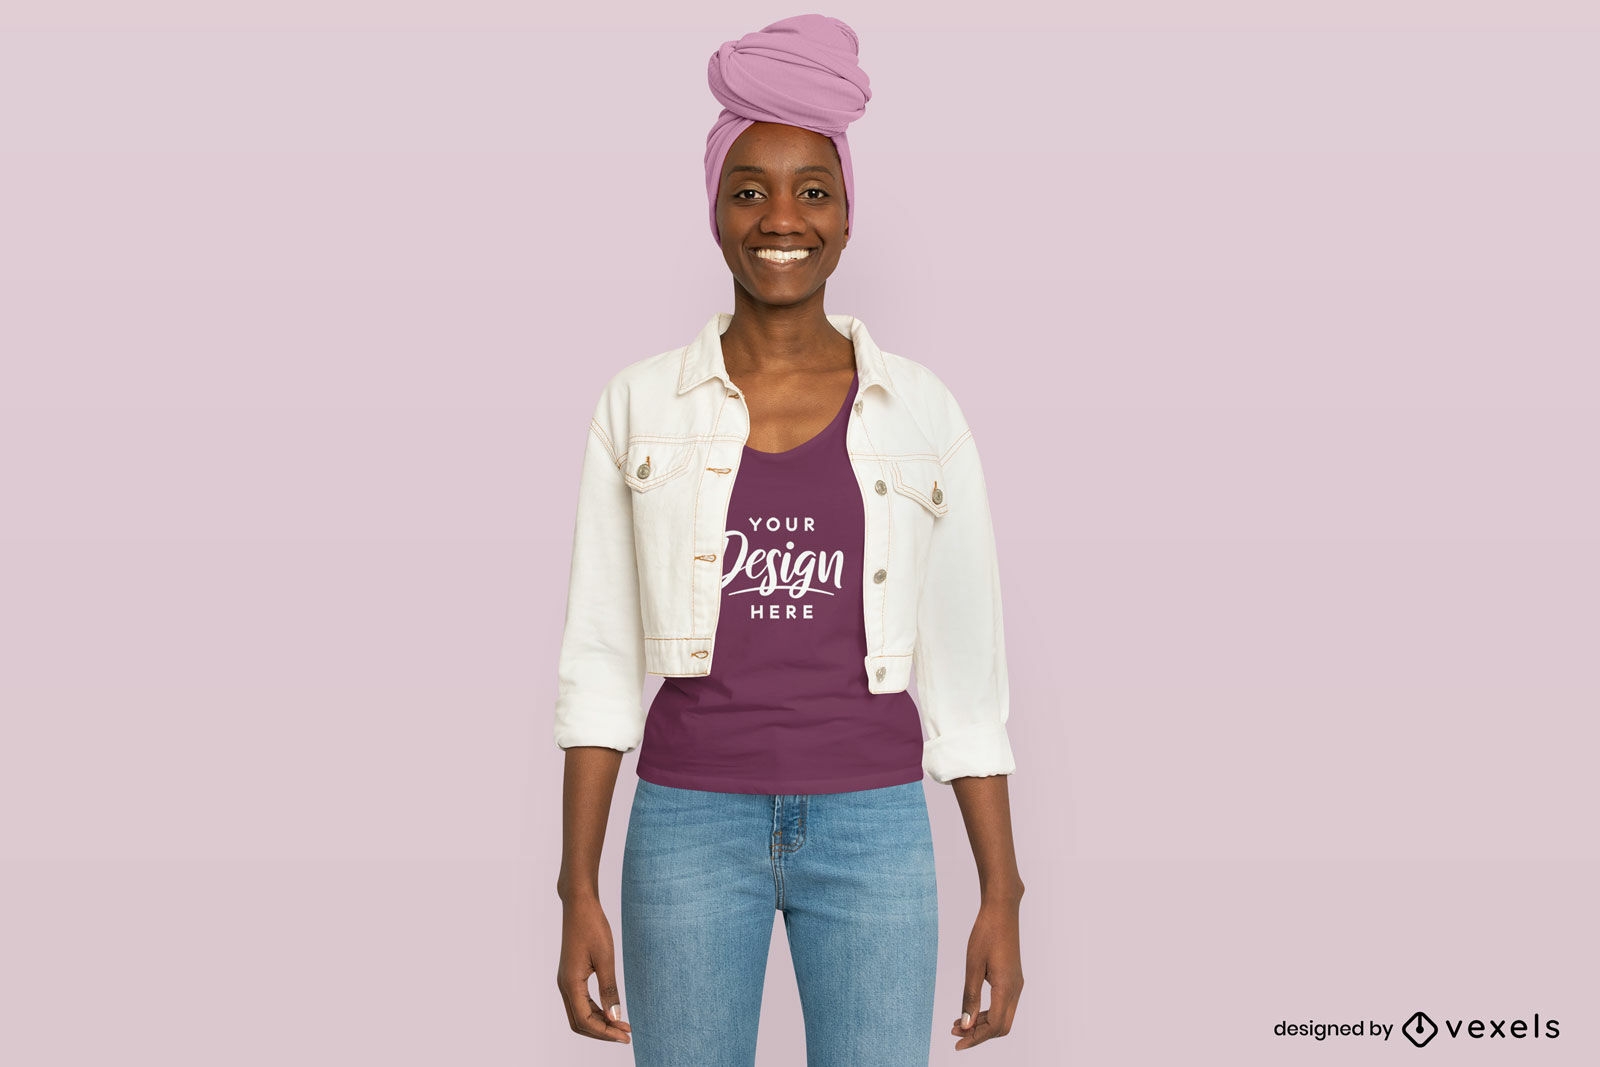 Black girl with headscarf and tank top mockup